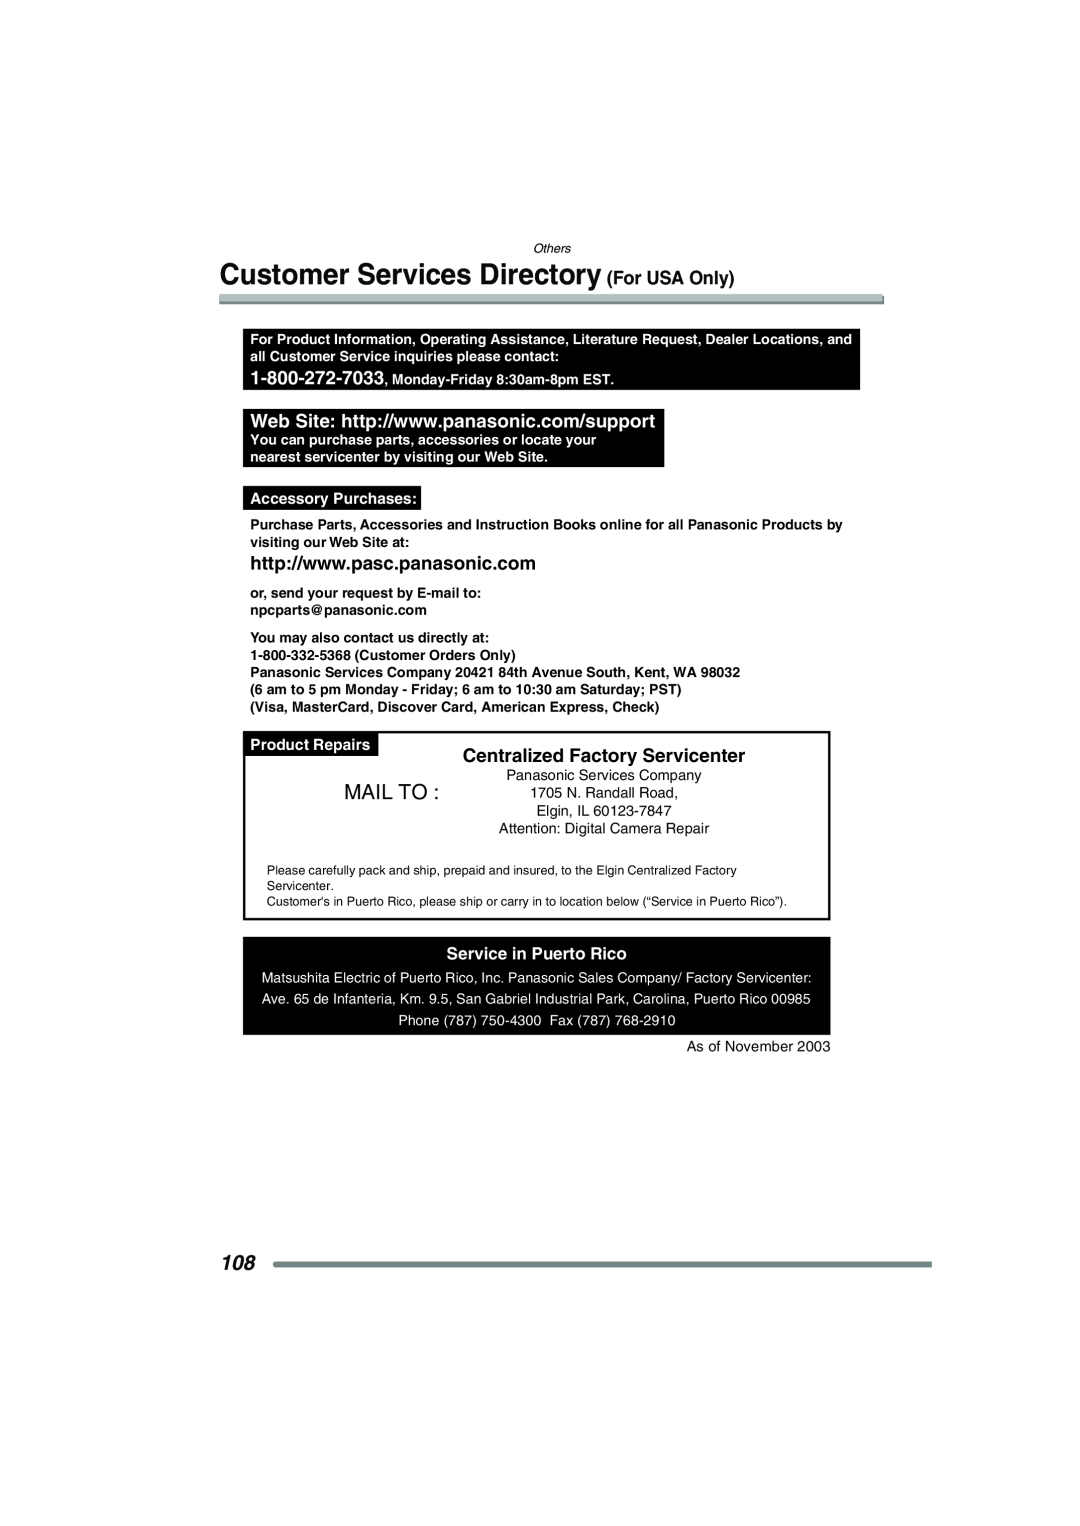 Panasonic DMC-FX7PP Customer Services Directory For USA Only, Mail To, Centralized Factory Servicenter, Product Repairs 